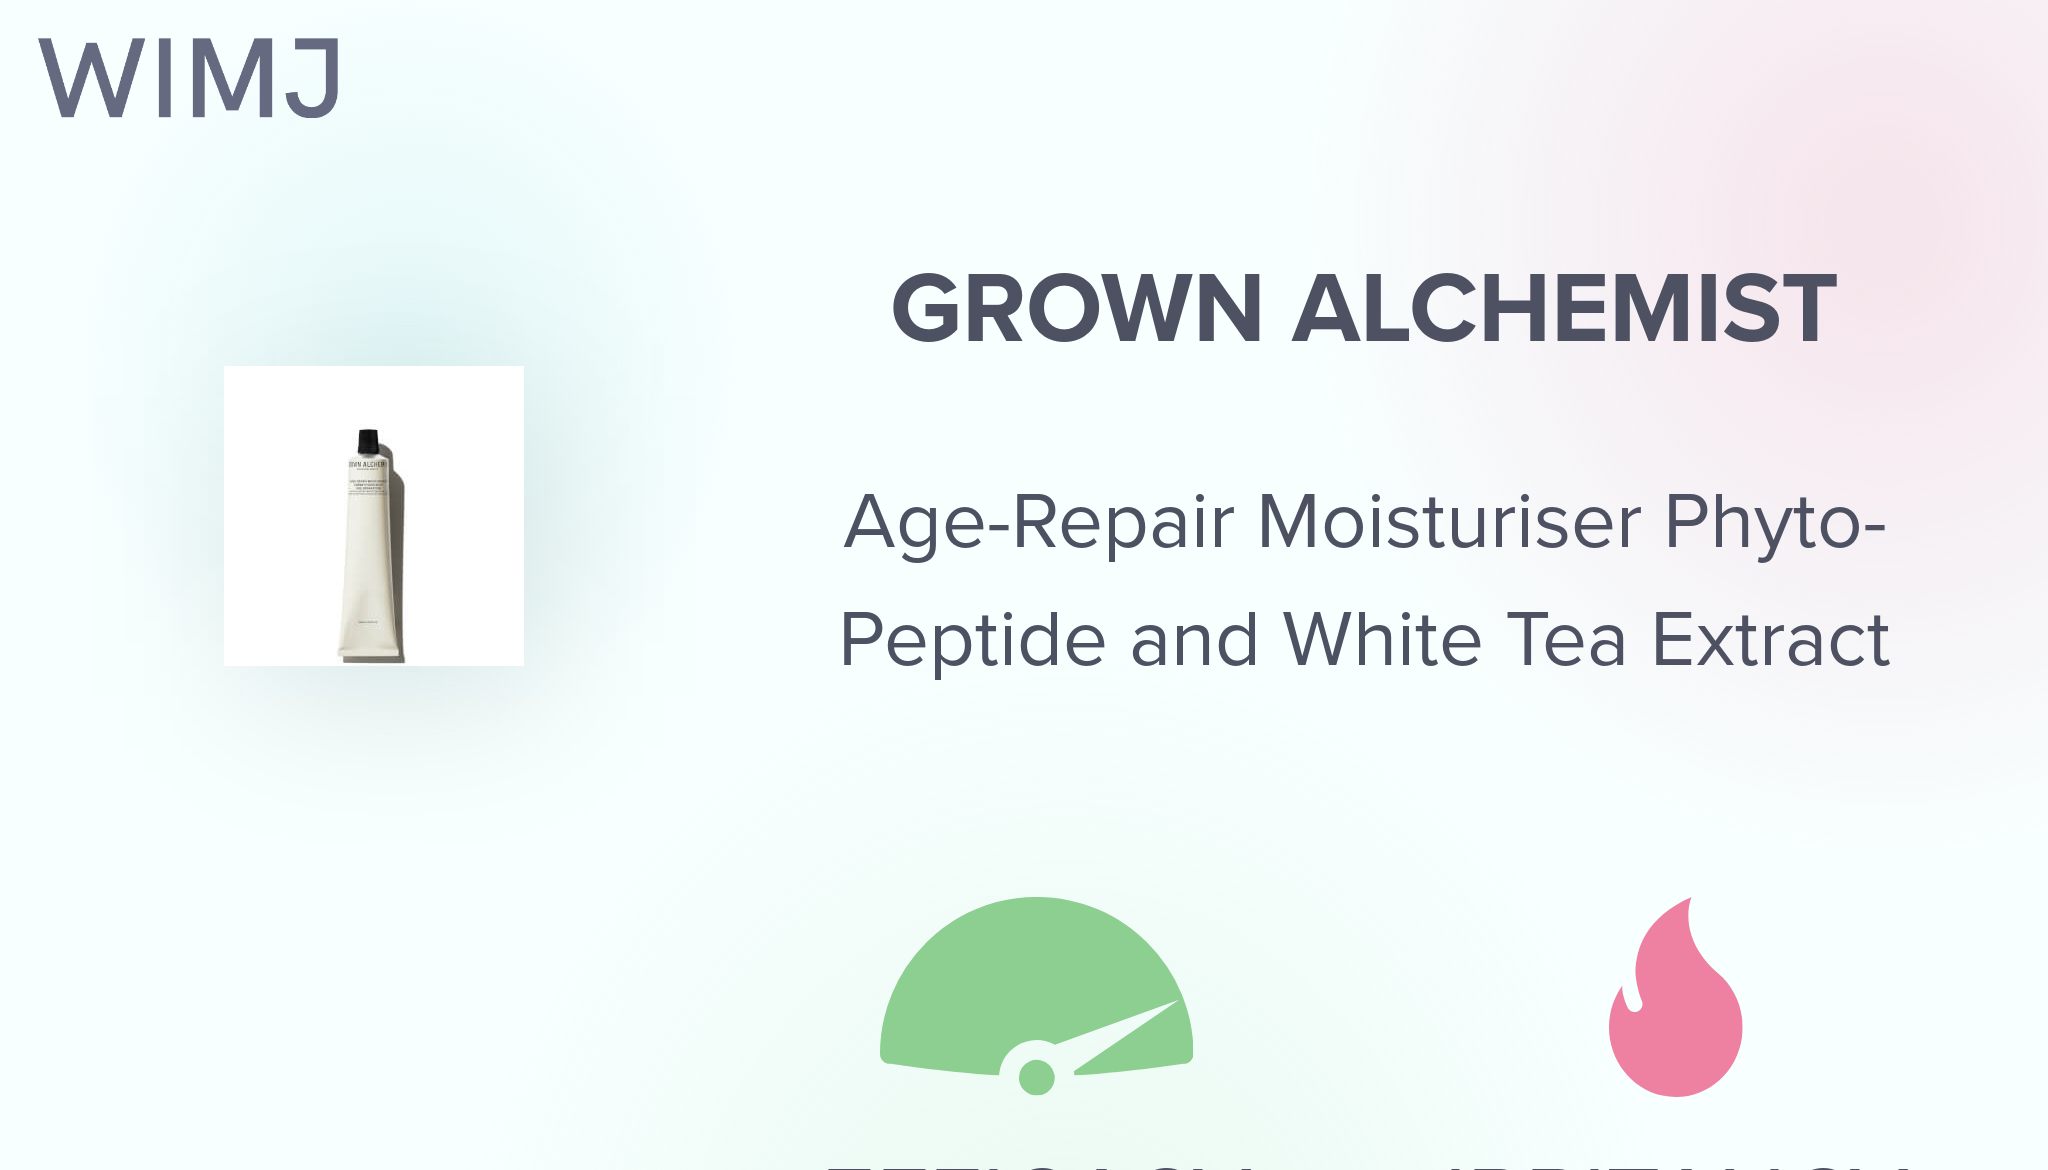 Review: Grown Alchemist Extract - Tea - White Moisturiser and Phyto-Peptide Age-Repair WIMJ